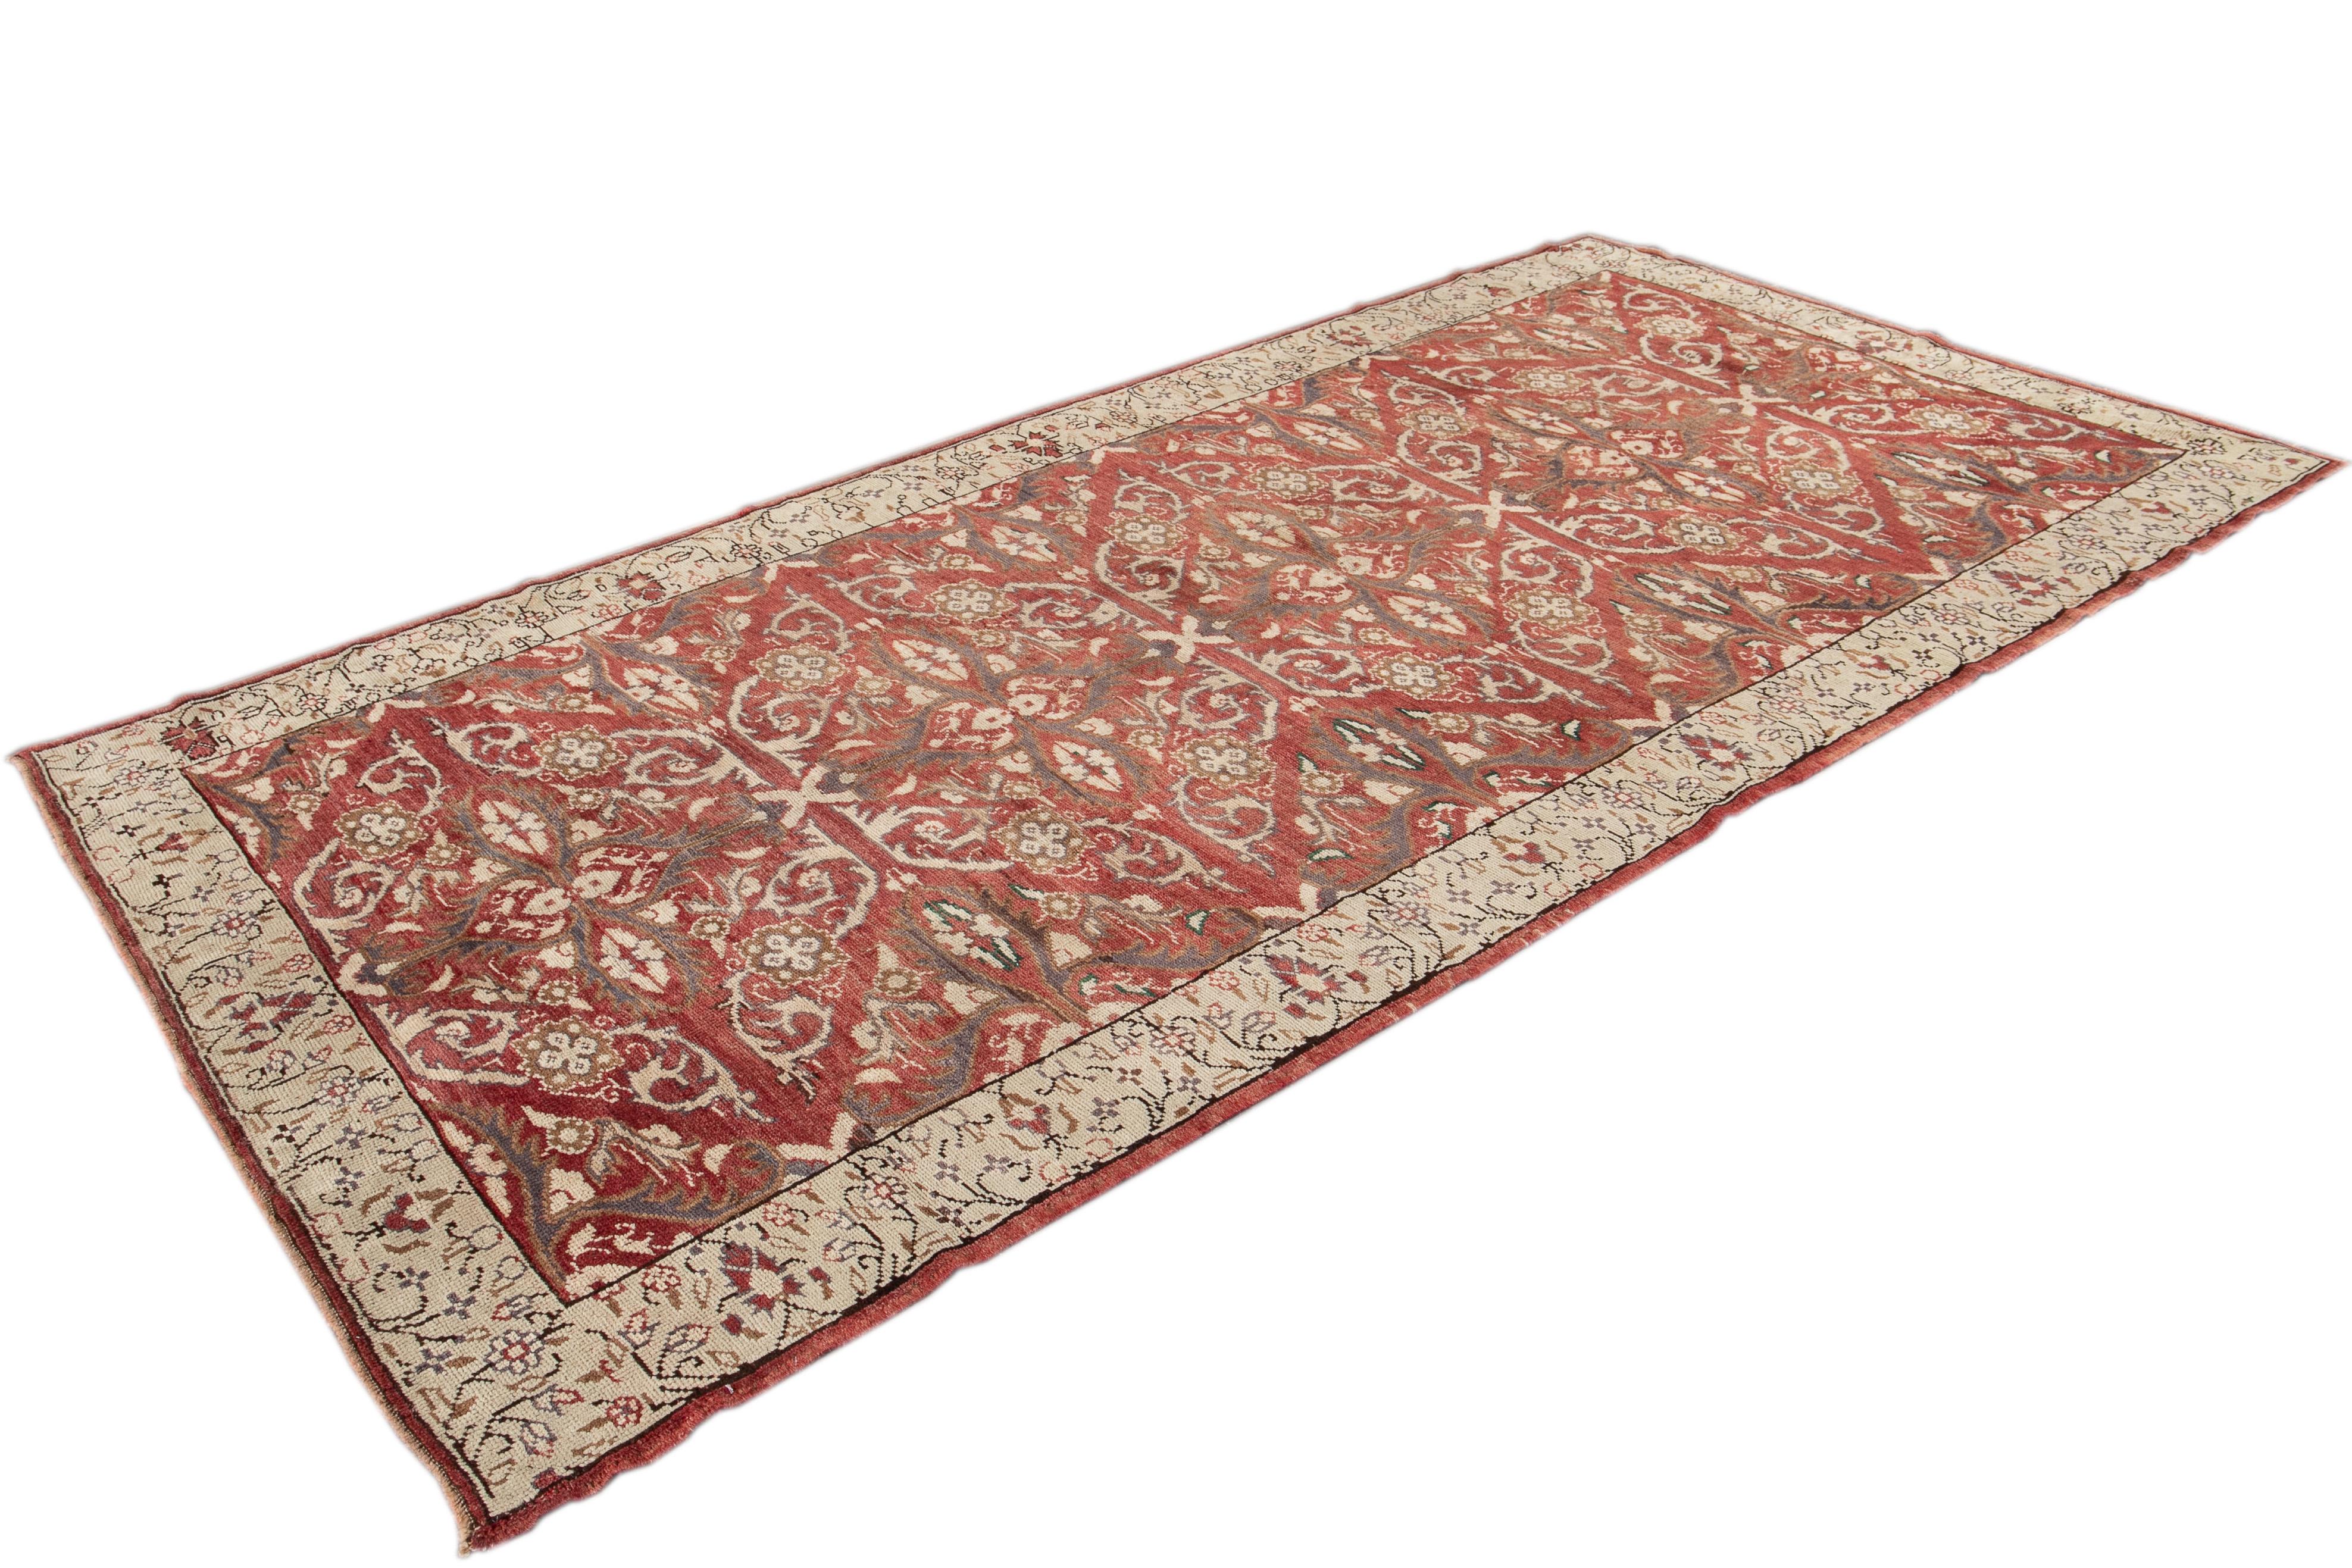 Beautiful Anatolian Runner with a rust field and ivory accents with detailed designs all-over the rug. 

This rug measures 5' 4